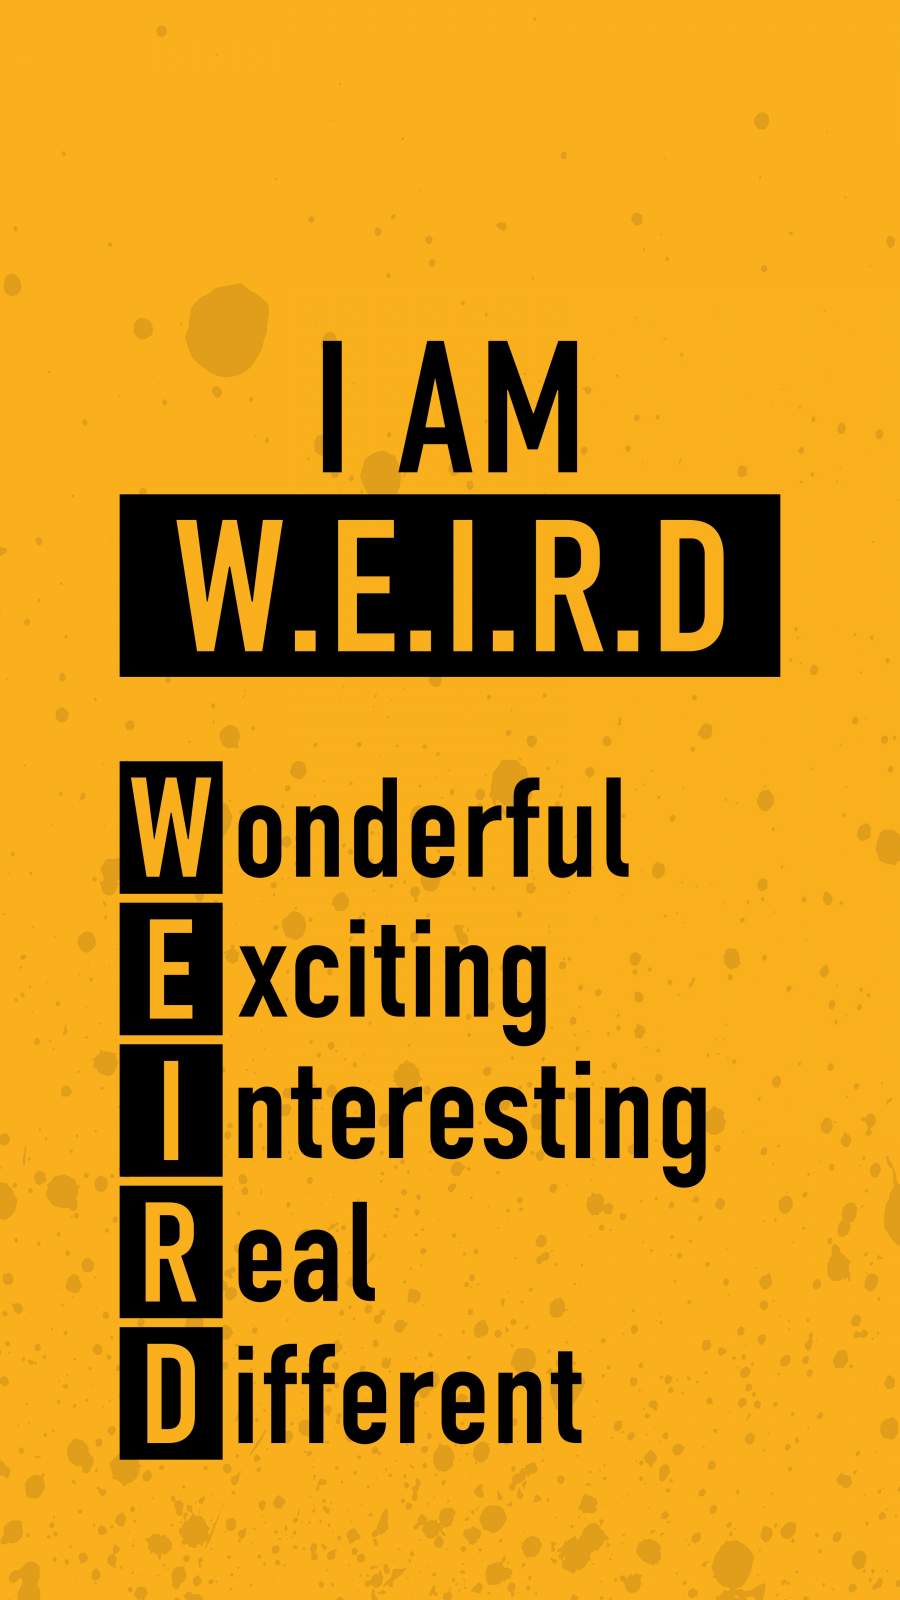 Stay Weird Cute Wallpaper for Phone  aesthetic phone wallpapers